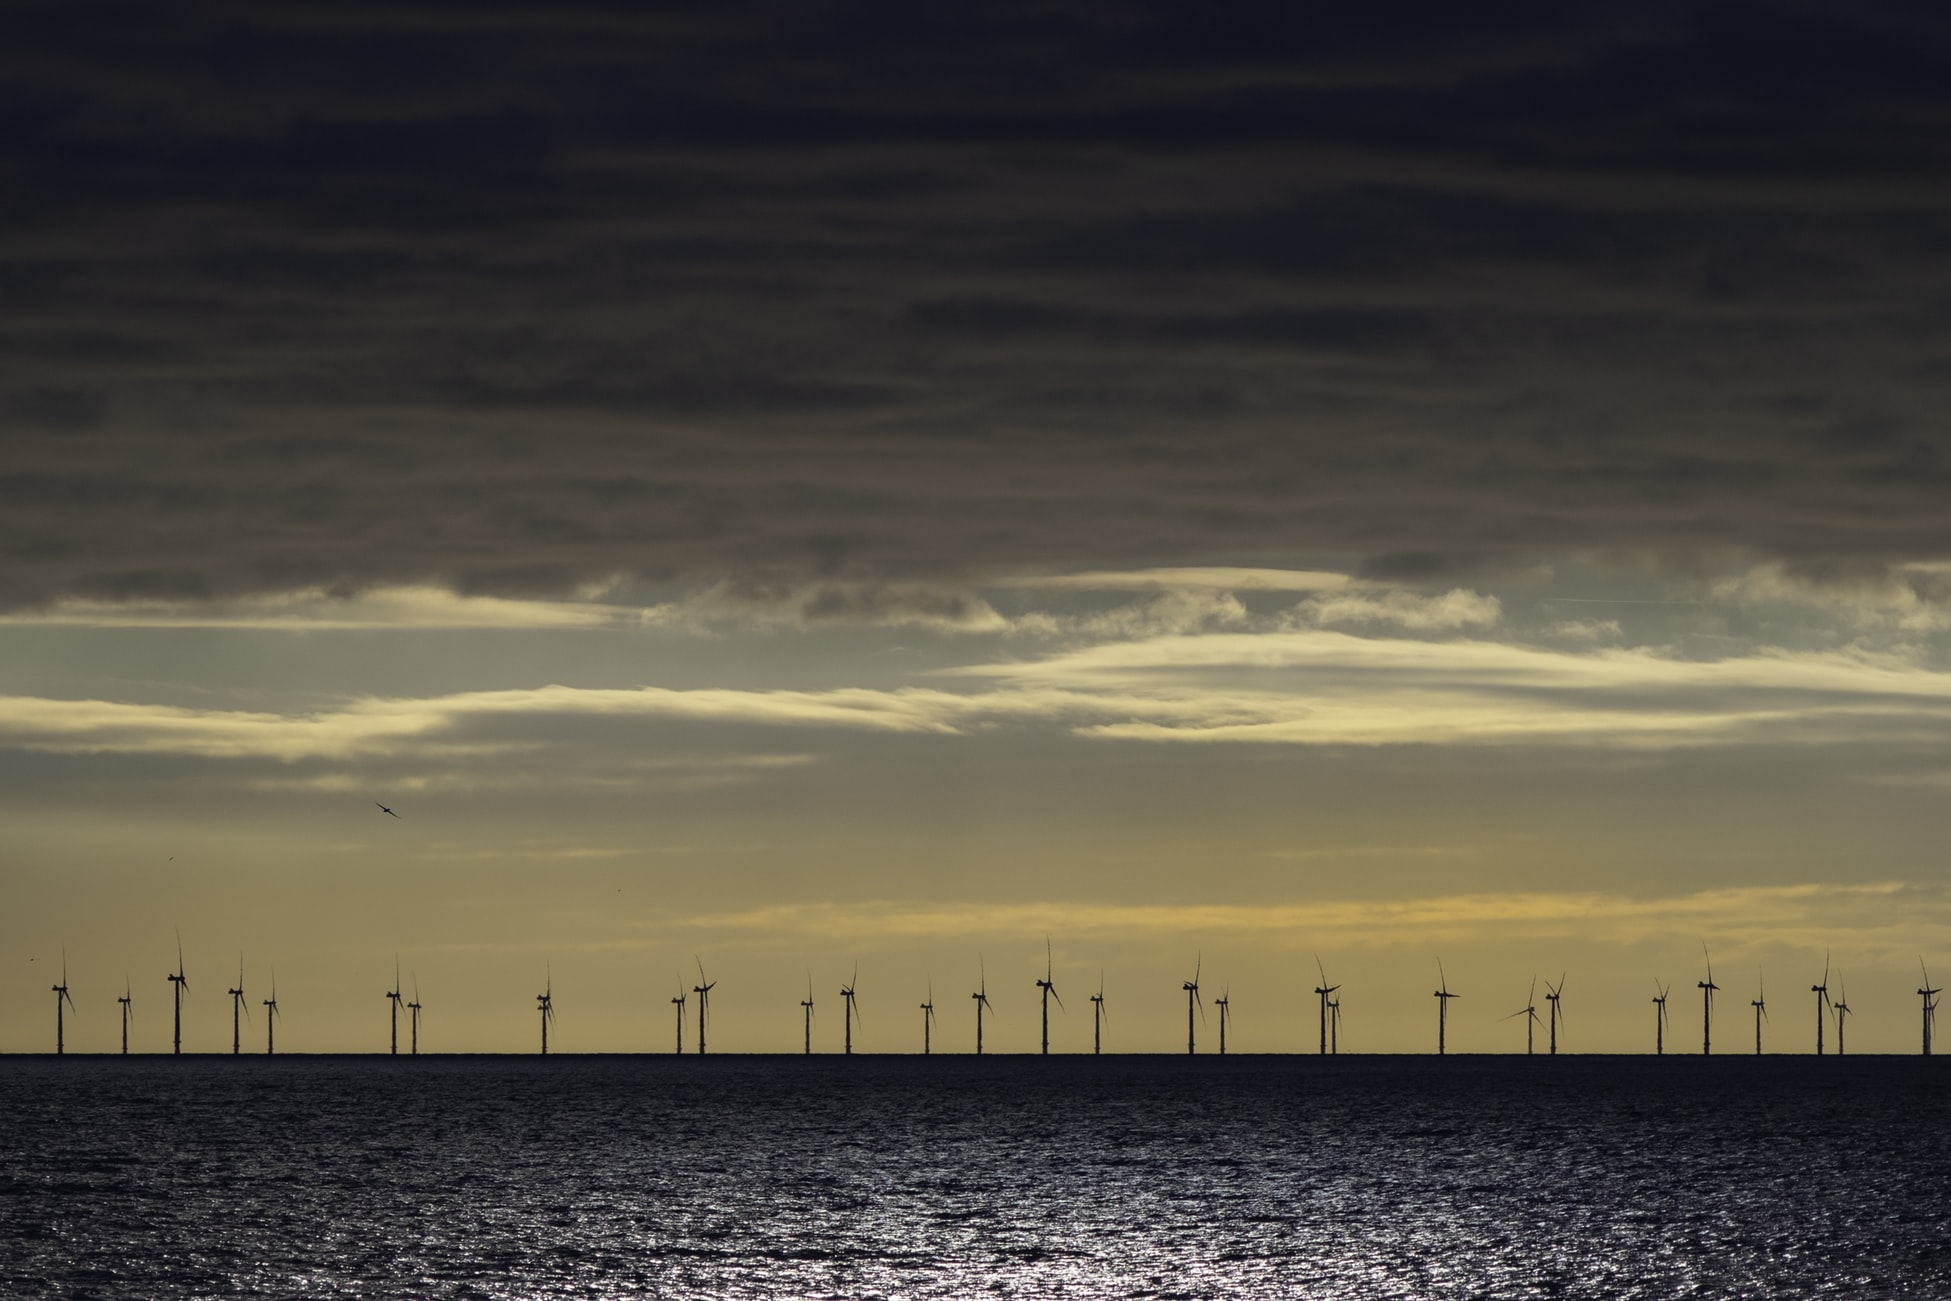 Denmark is a world leader in renewable energy and is way ahead of its nearest rival Ireland, which generated 28% of its energy from wind in 2018. Wind energy is the second largest form of power generation capacity in Europe, producing 14% of electricity in the European Union, according to data by wind energy advocacy group, Wind Europe.